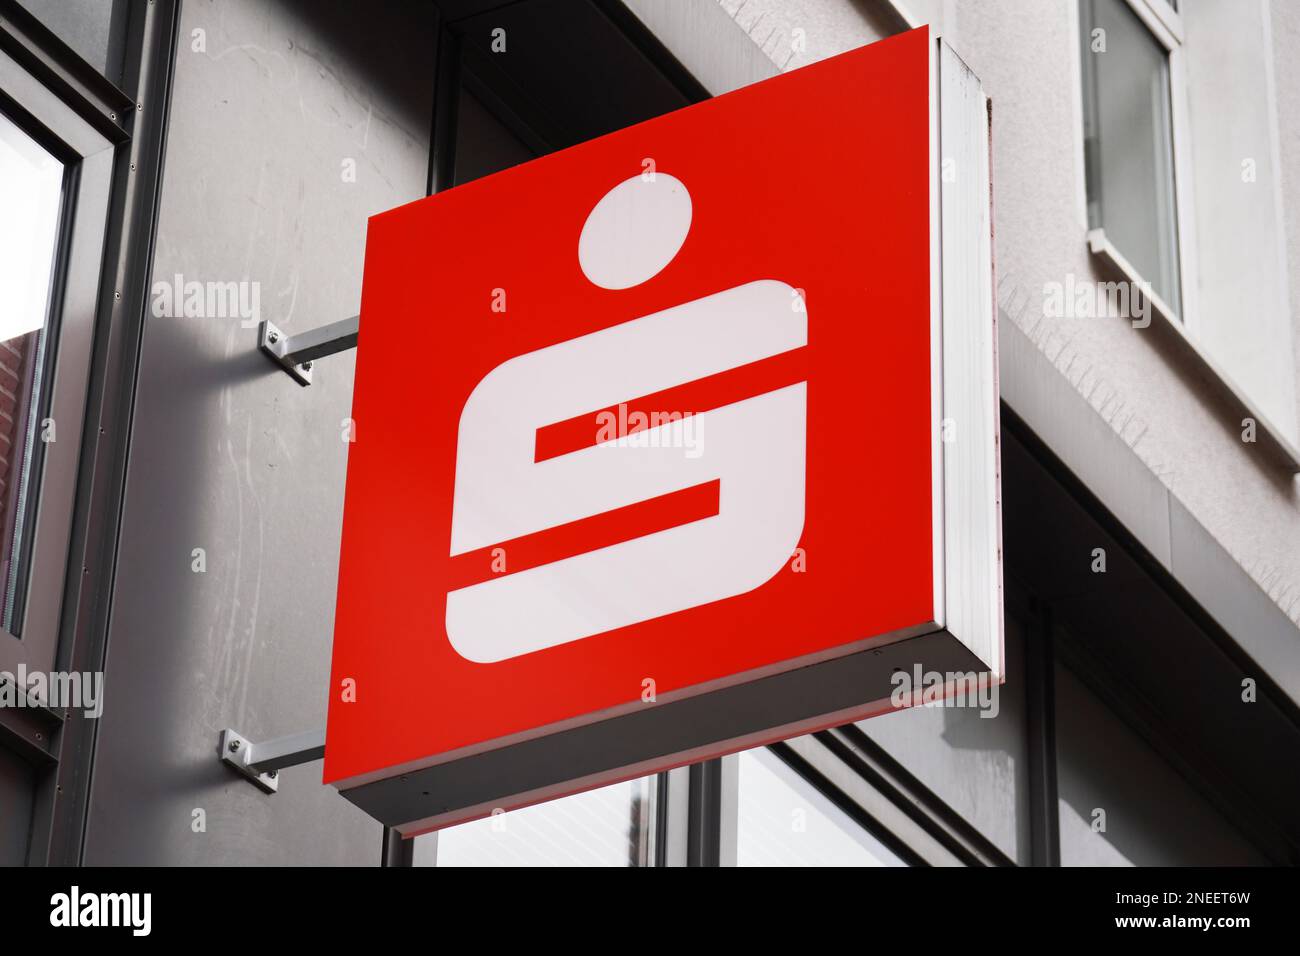 Hannover, Germany - March 1, 2020: Close-up sign with Sparkasse - German savings bank - logo on local branch building exterior Stock Photo